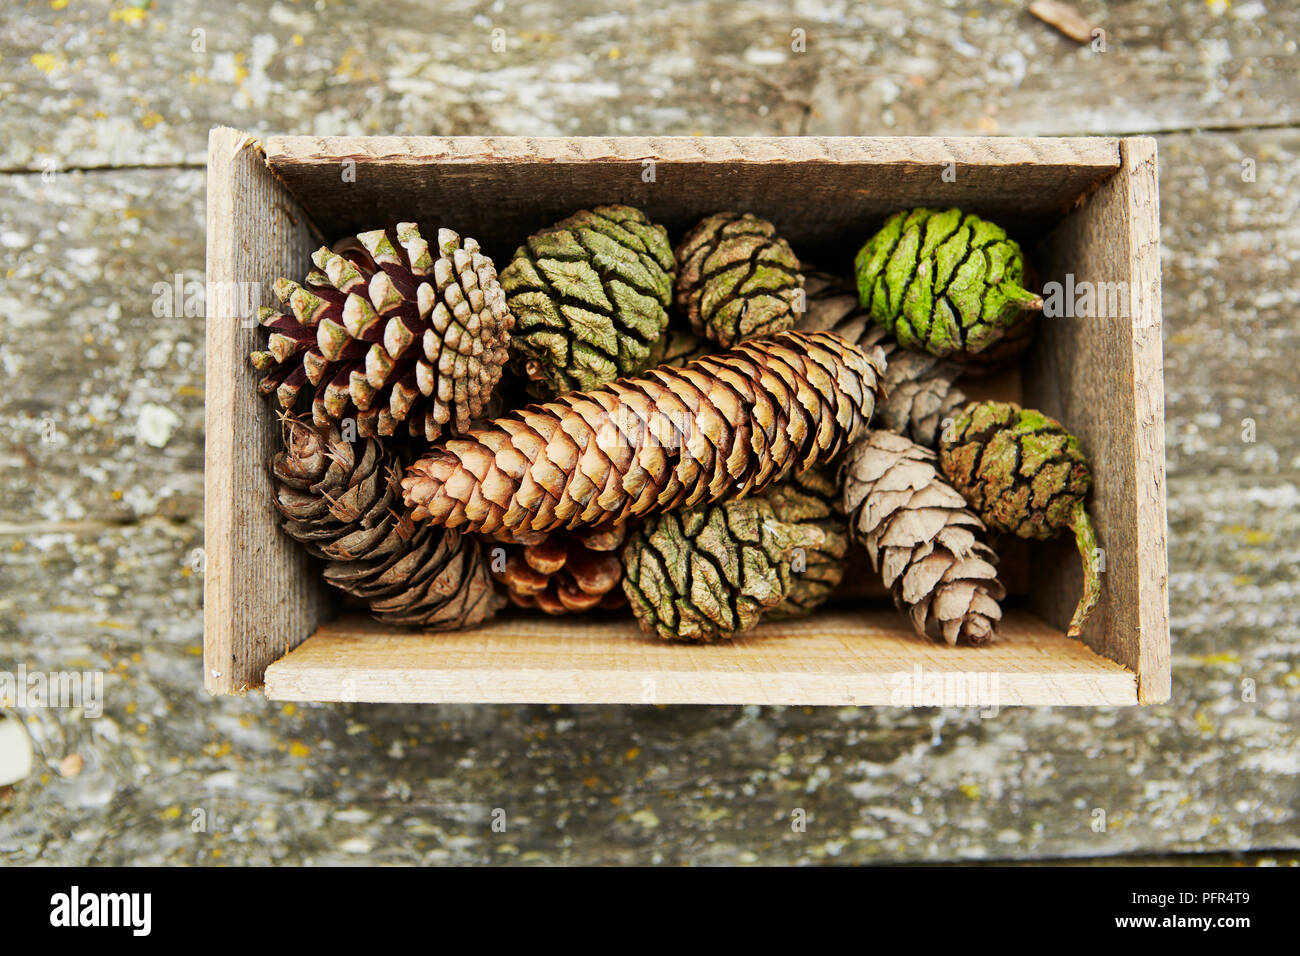 Collection of pine cones in wooden box Stock Photo